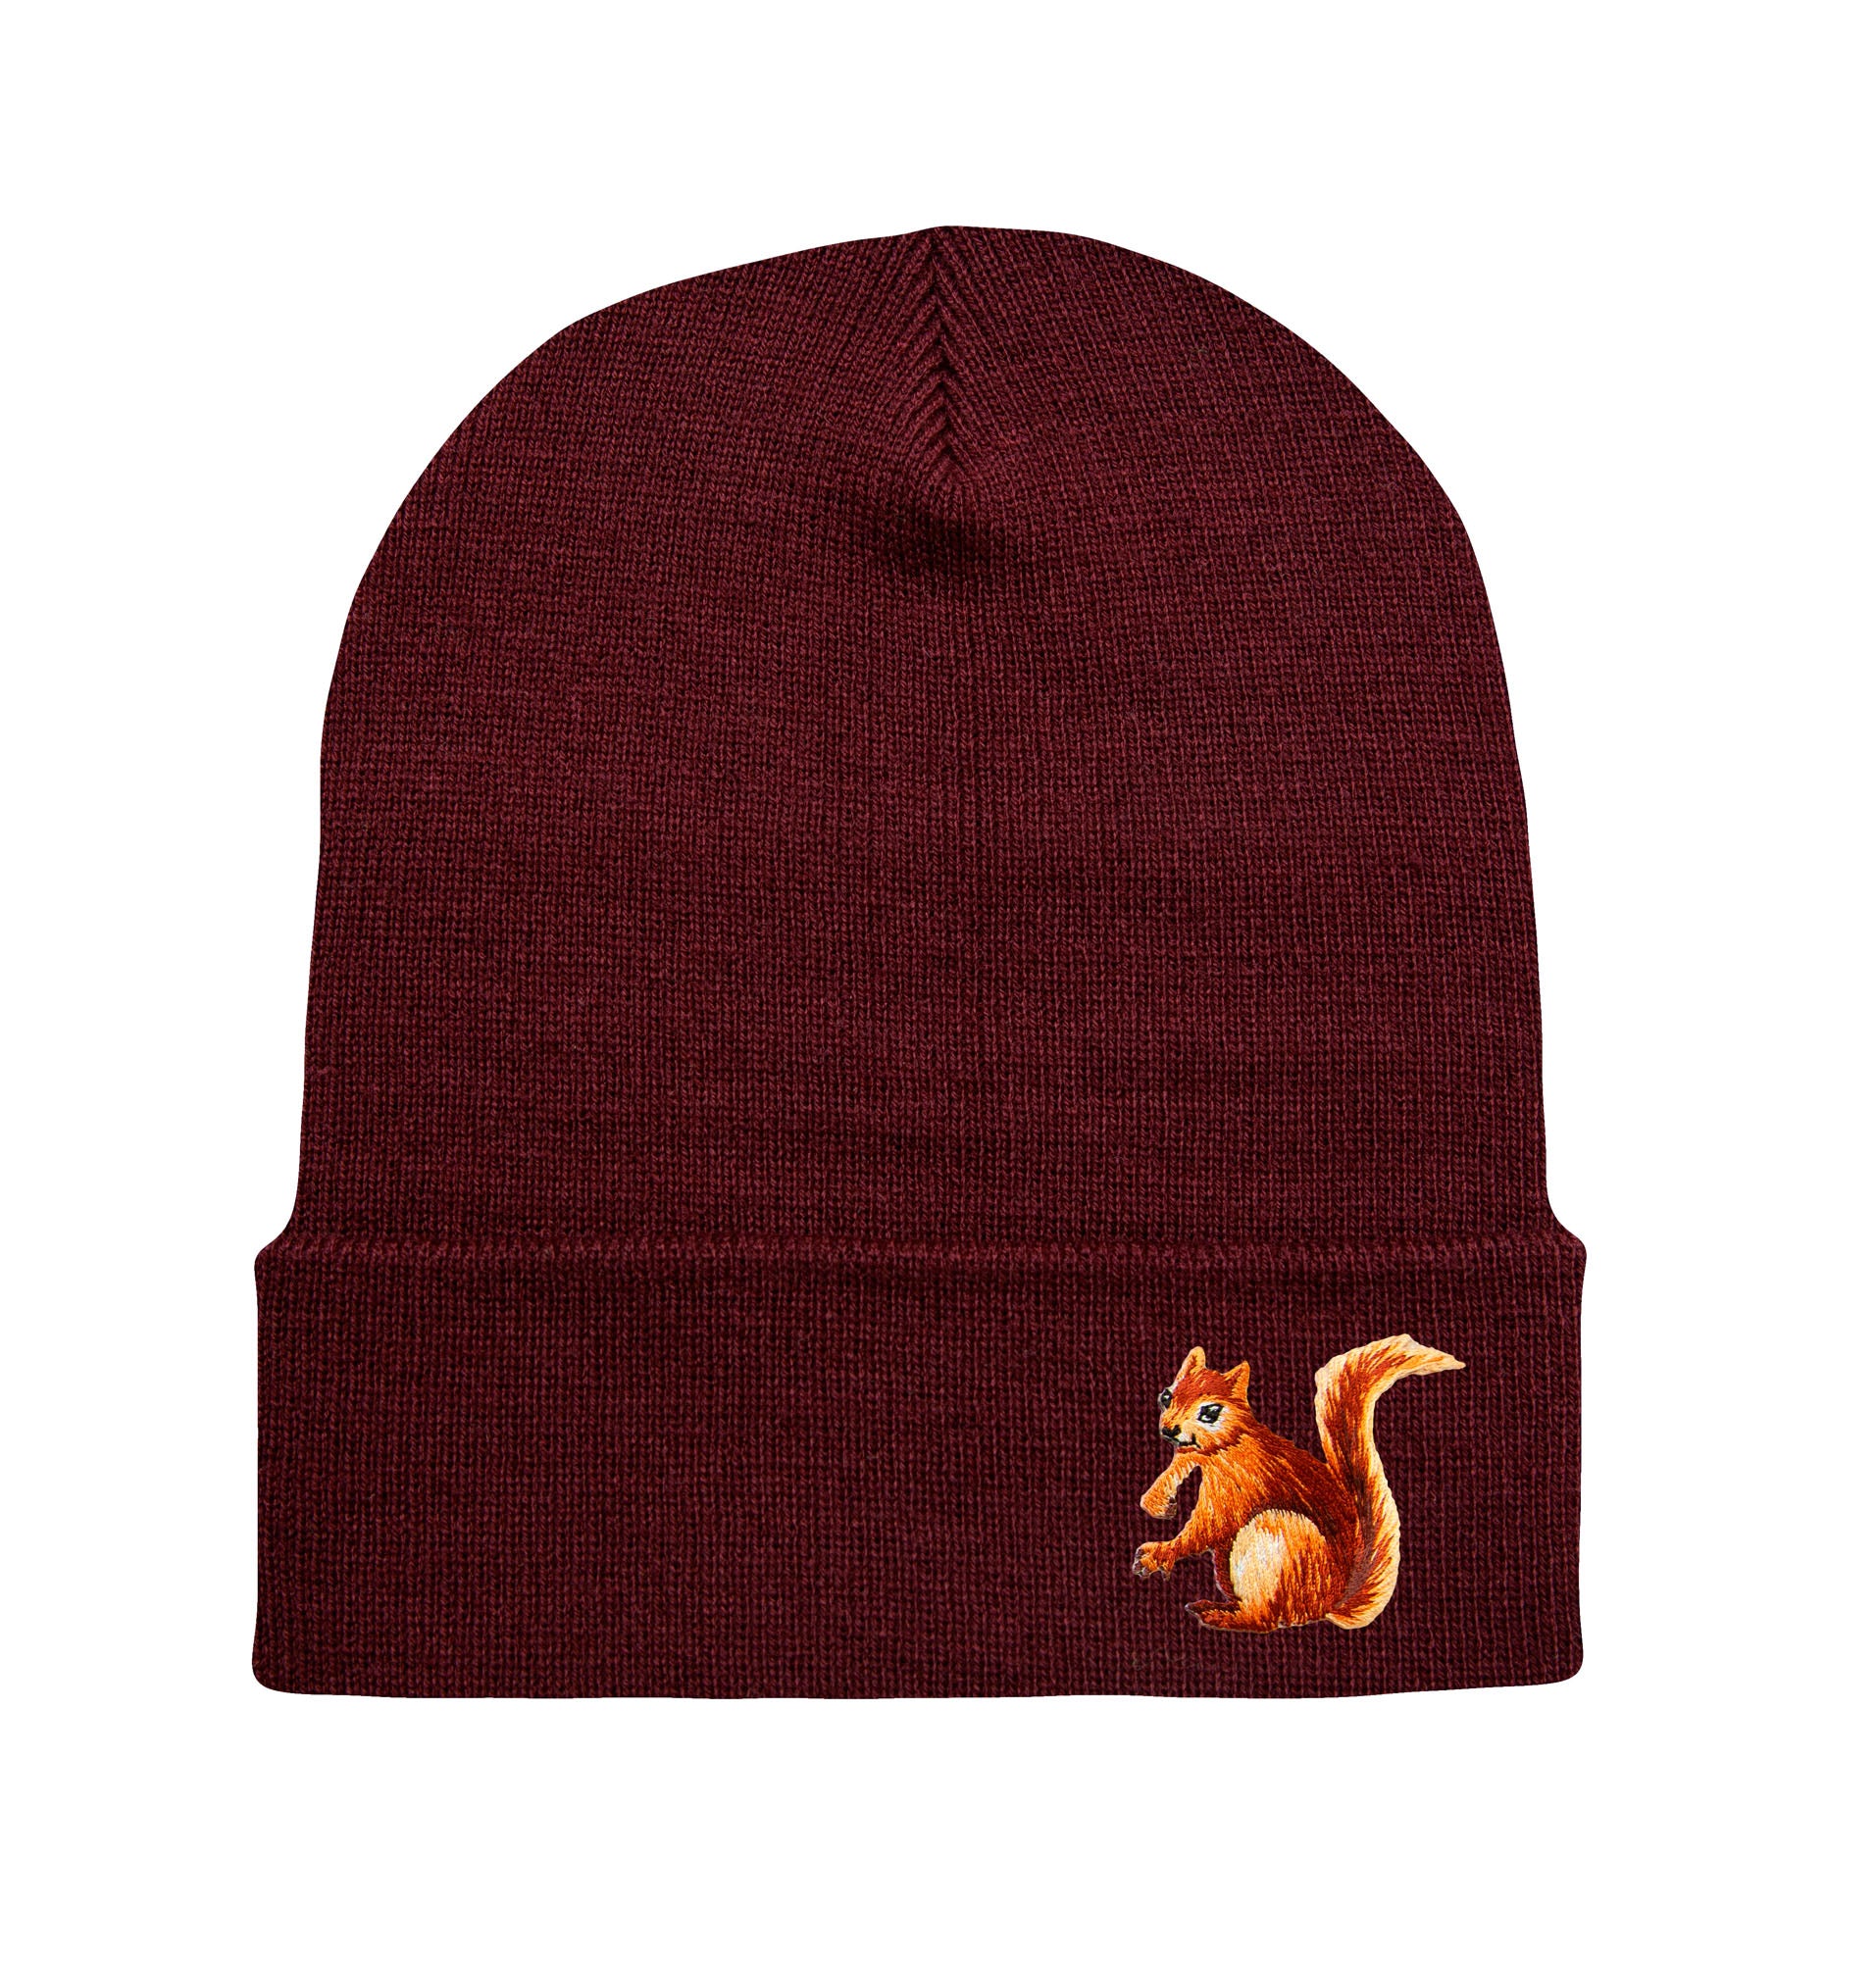 The Hat - Maroon